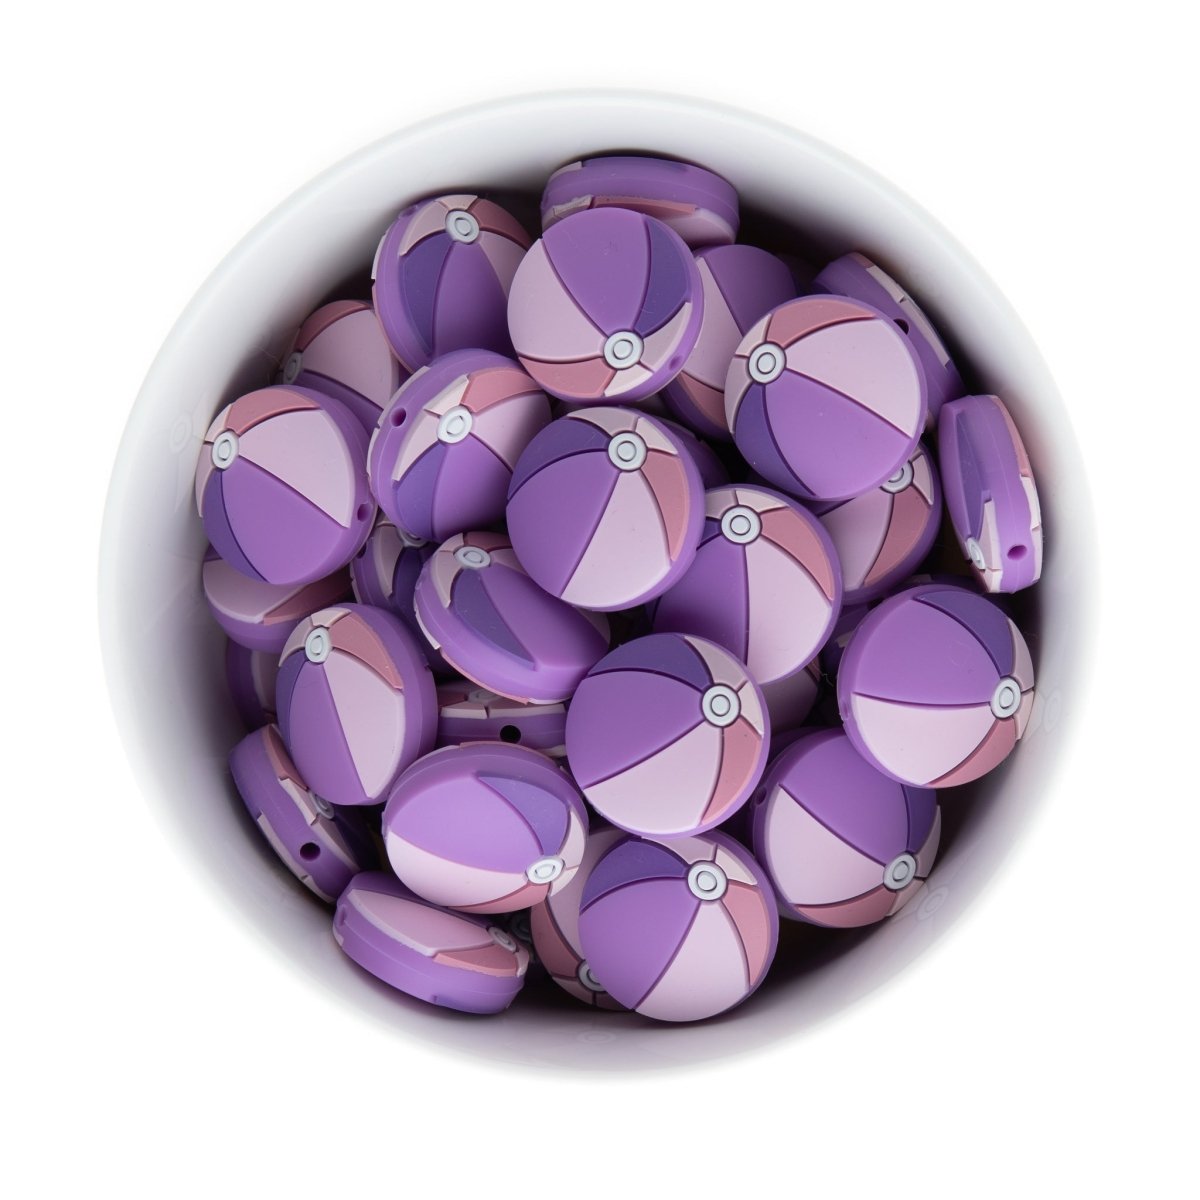 Silicone Focal Beads Beach Balls Lavender from Cara & Co Craft Supply